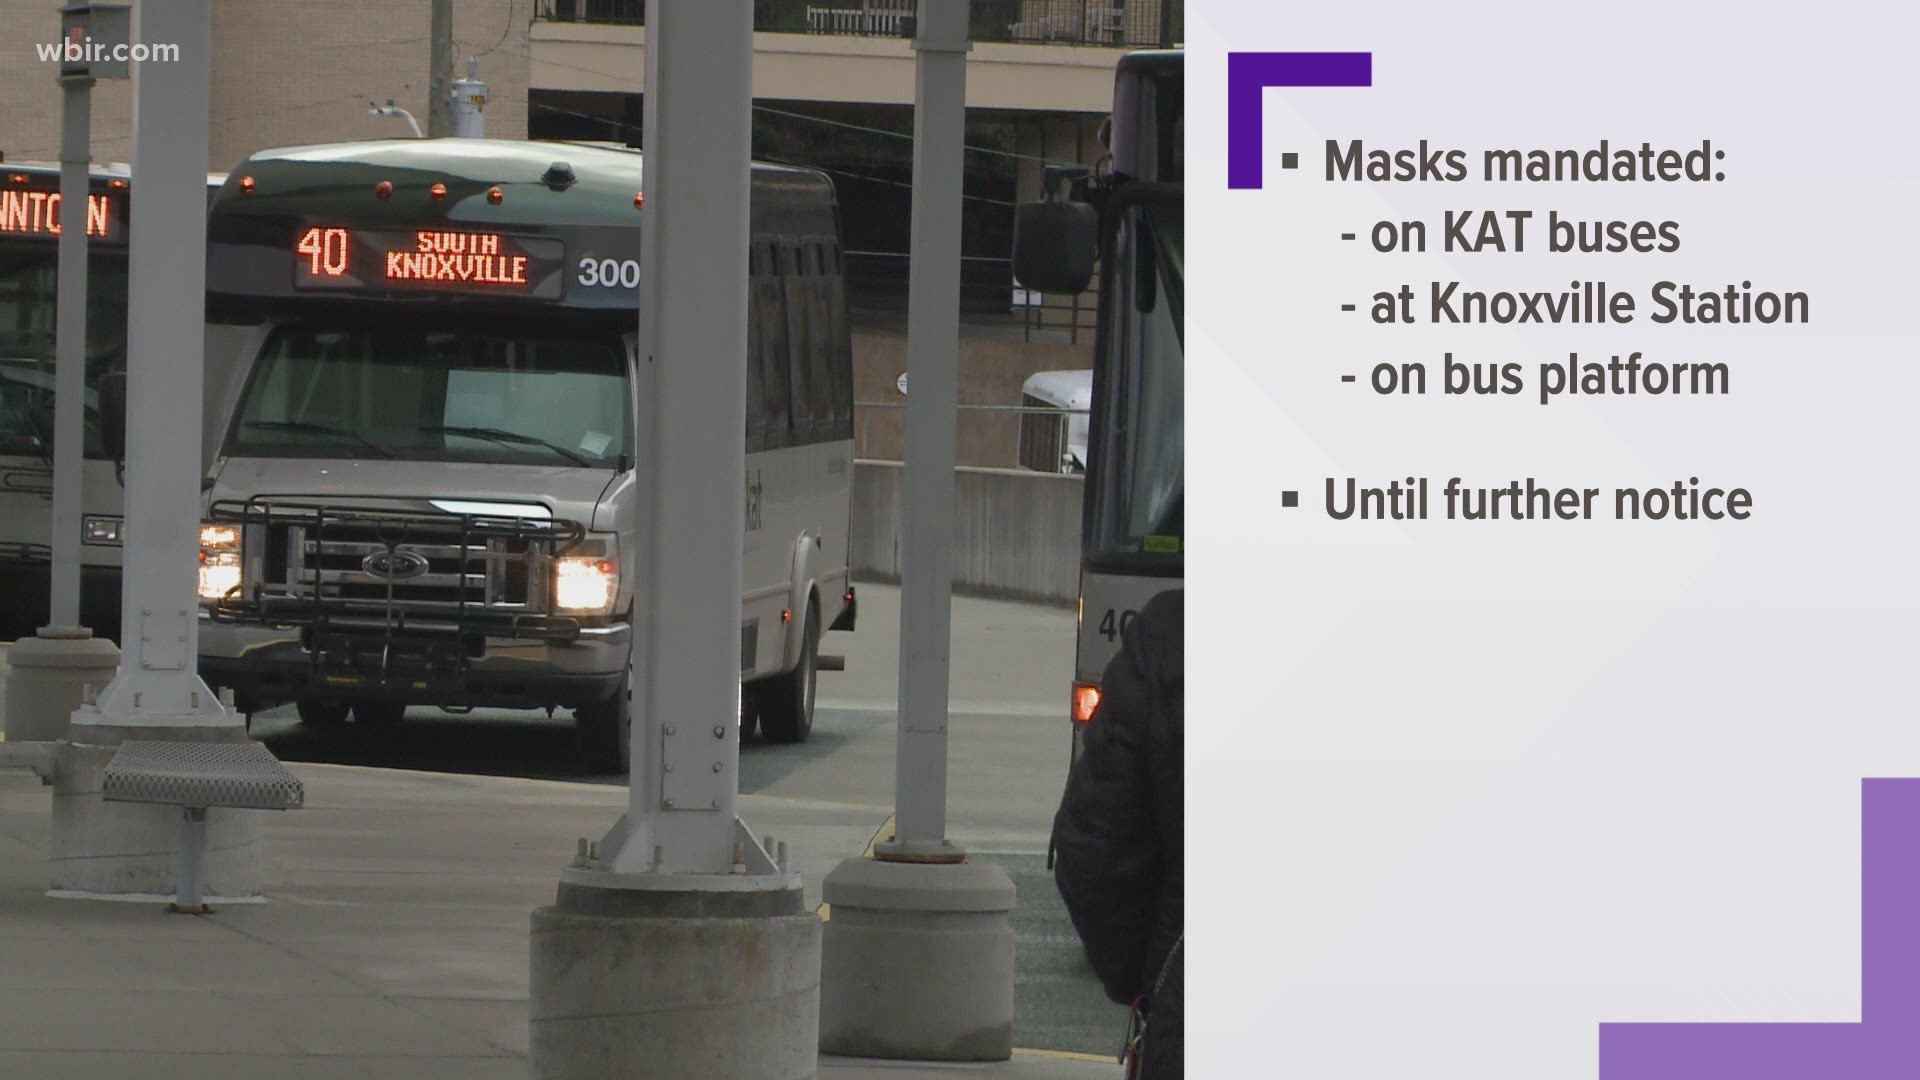 The CDC continues to recommend masks on all public transportation as restrictions ease in buildings.